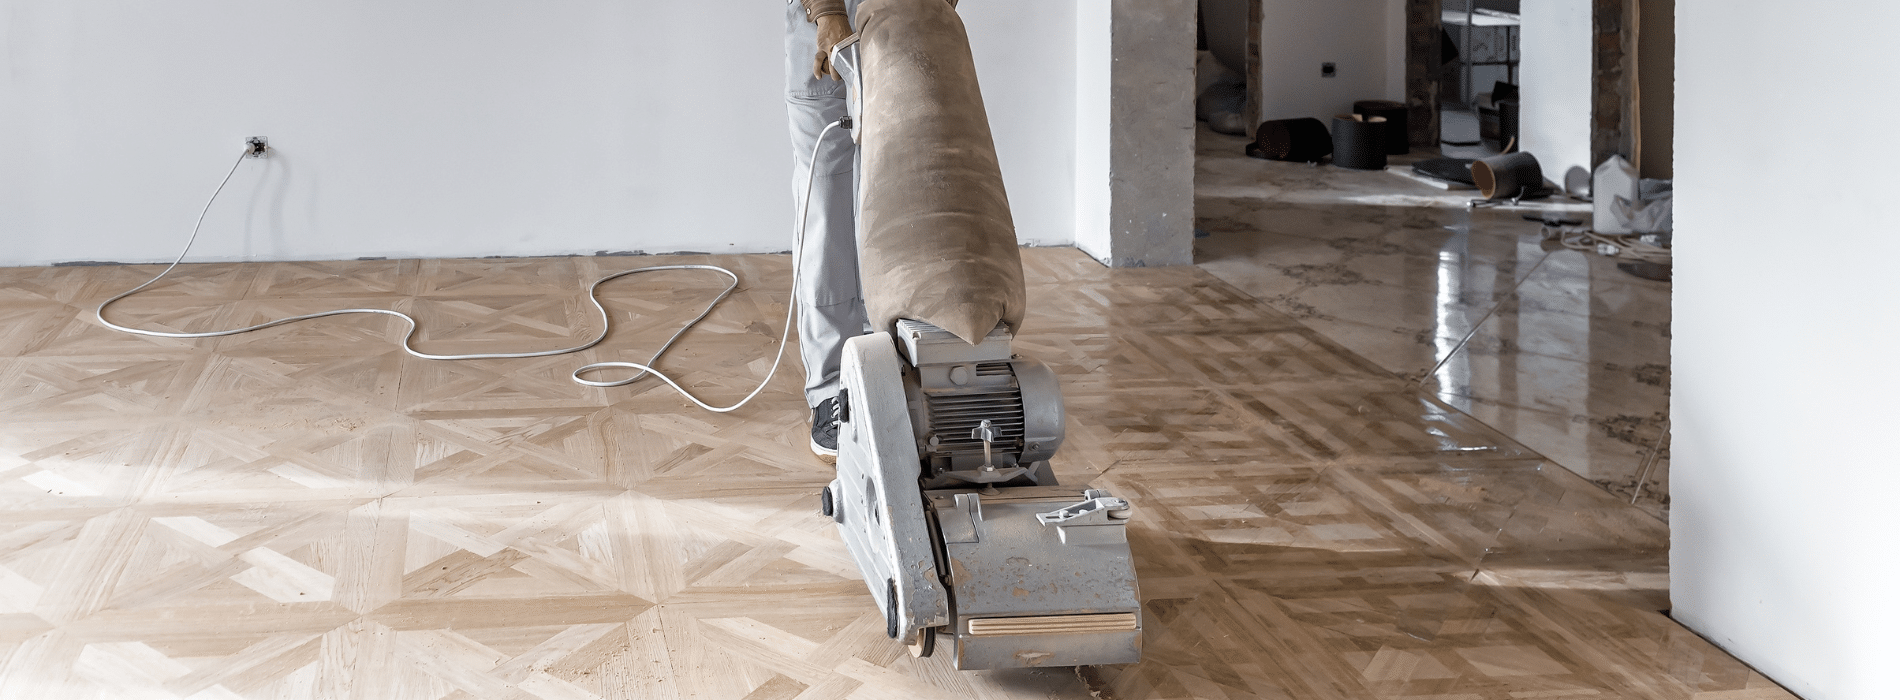 Mr Sander® meticulously sanding a herringbone floor using an Effect 2200 (220V, 50-40Hz) Bona belt sander in Poplar, E14. The 350x750 mm sander, connected to a HEPA-filtered dust extraction system, ensures a clean and efficient result for a flawless finish.